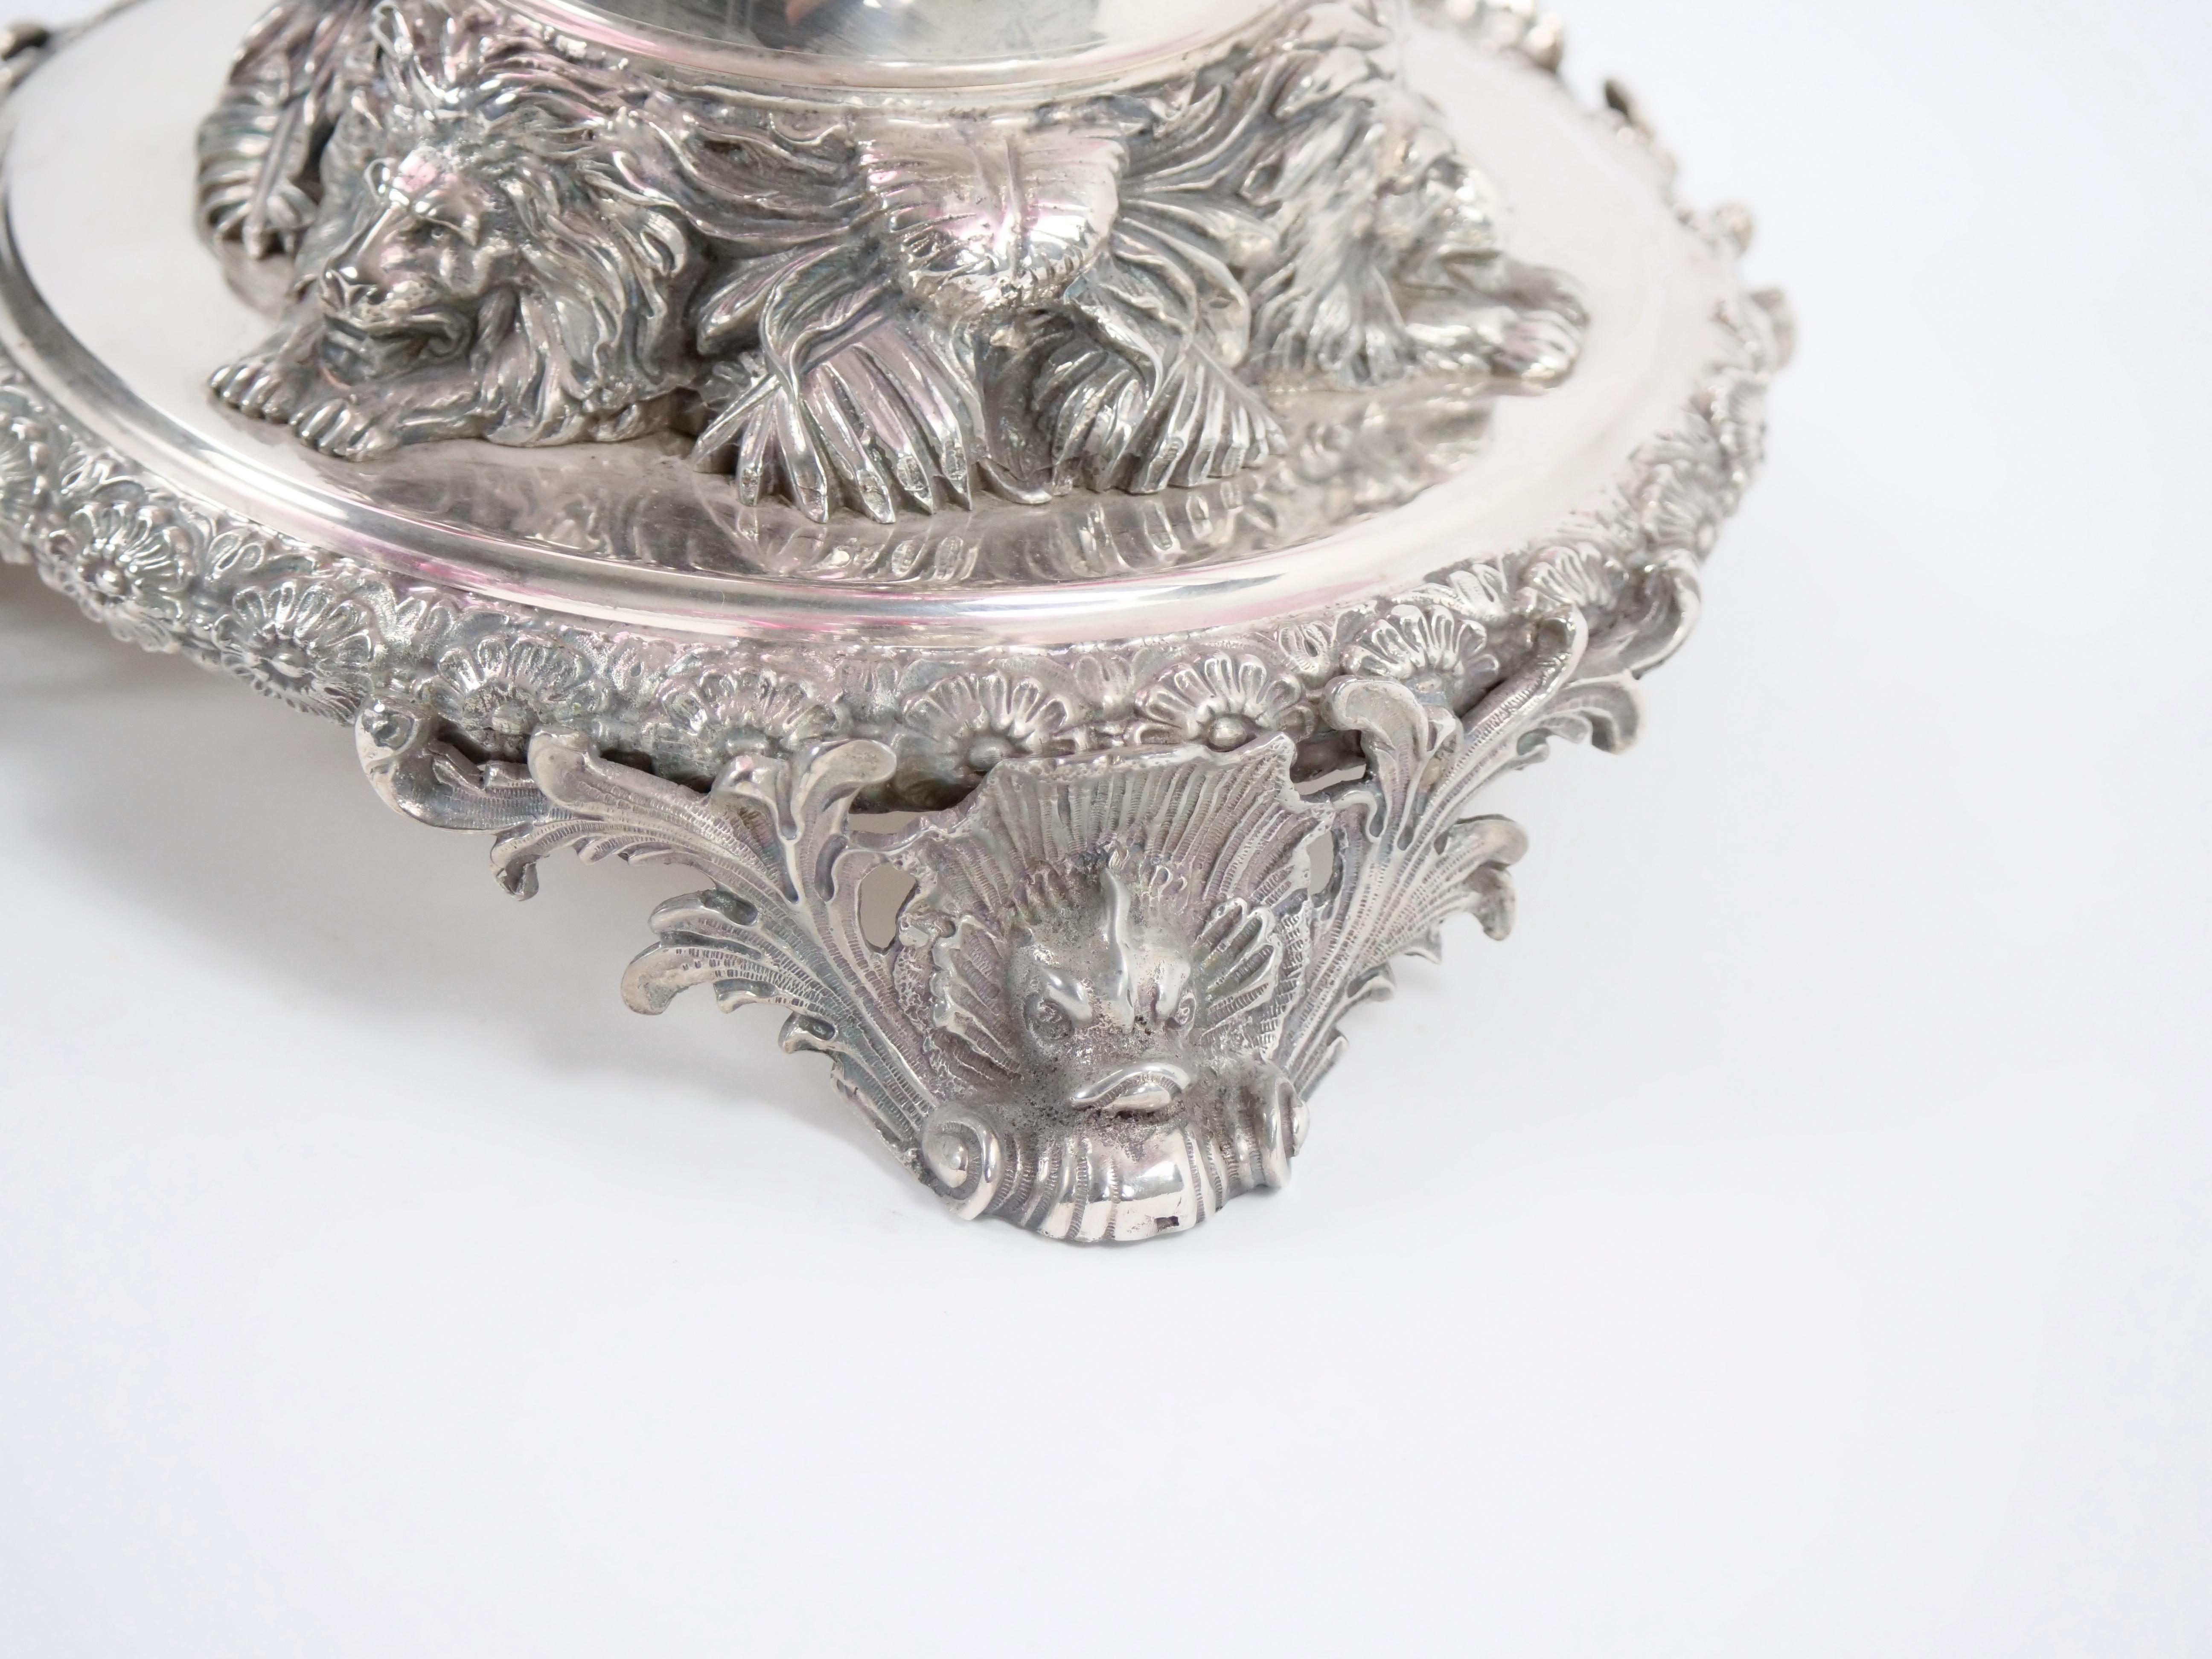 19th Century Georgian Old English Silver Plate and Glass Epergne Centerpiece For Sale 9